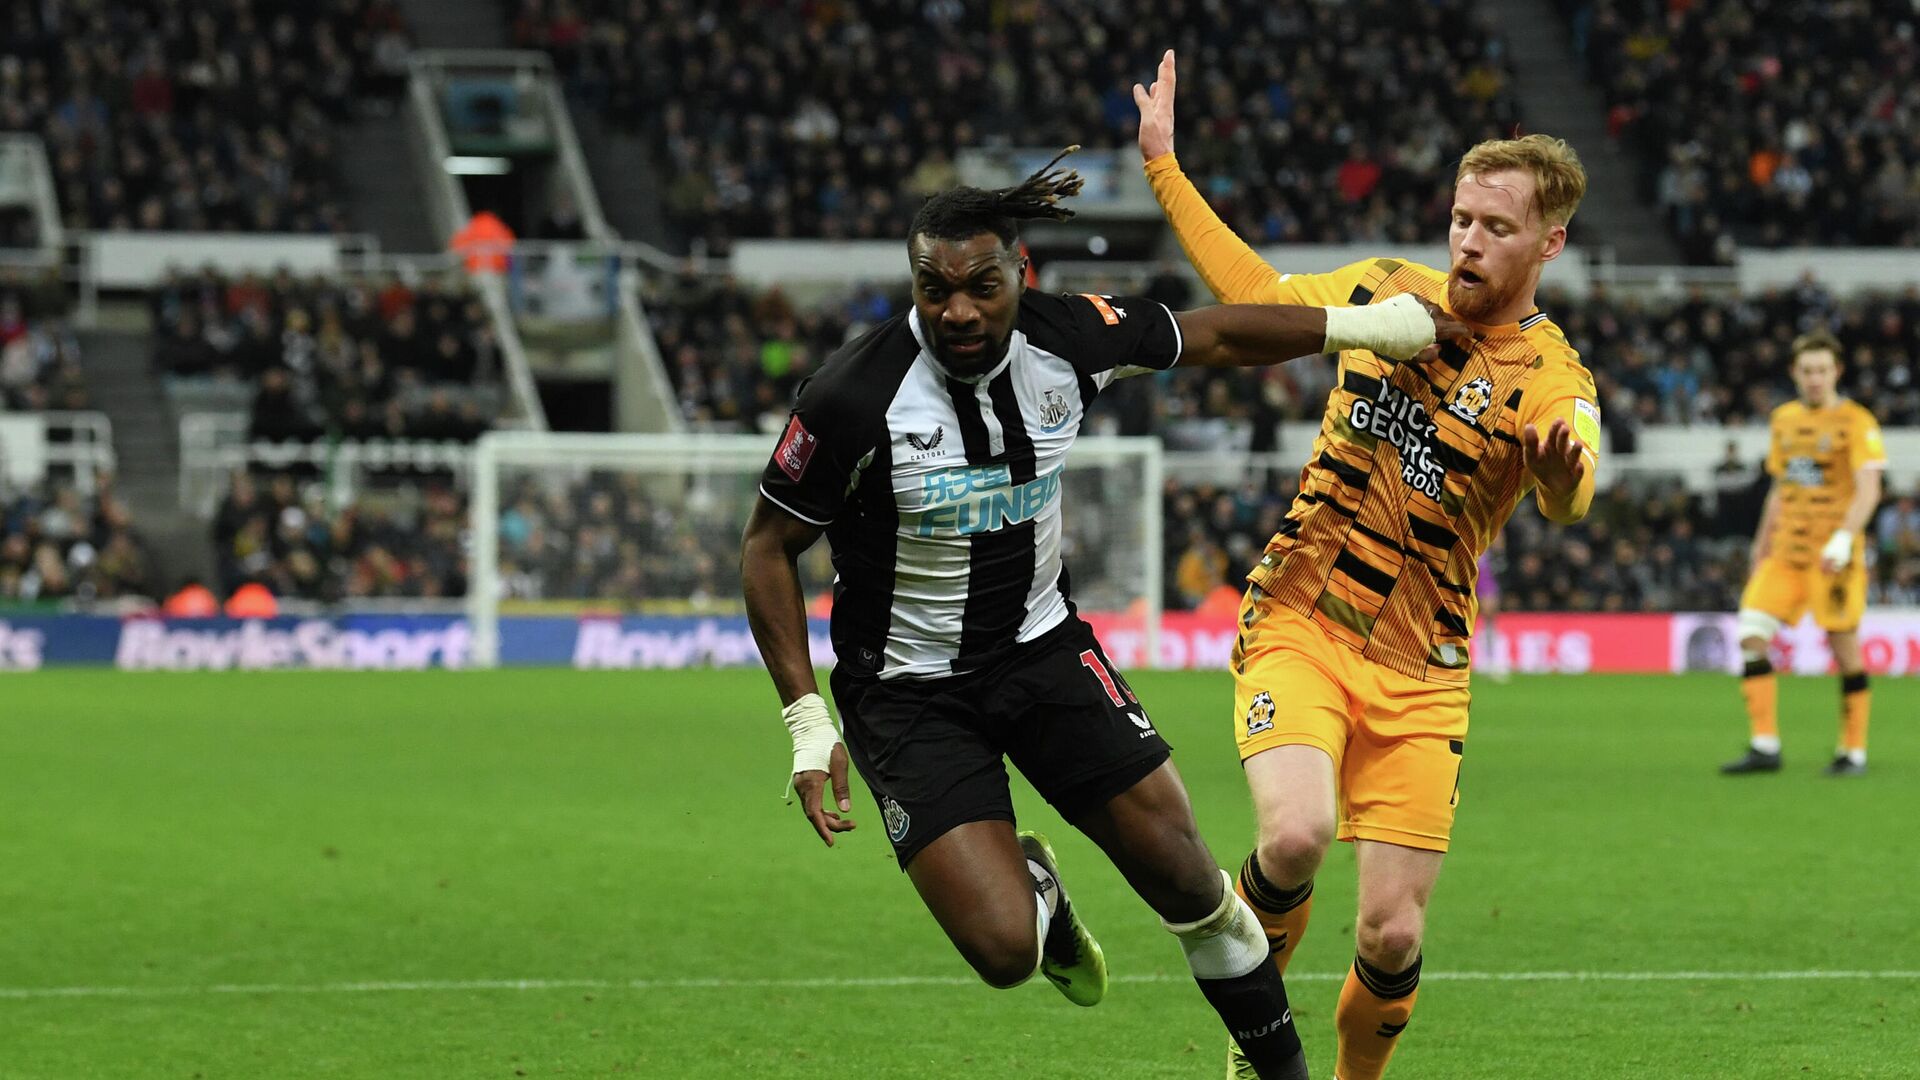 Newcastle United's French midfielder Allan Saint-Maximin (L) vies with Cambridge United's English midfielder James Brophy (R) during the English FA Cup third round football match between Newcastle United and Cambridge United at St James' Park in Newcastle-upon-Tyne, north east England on January 8, 2022. (Photo by Paul ELLIS / AFP) / RESTRICTED TO EDITORIAL USE. No use with unauthorized audio, video, data, fixture lists, club/league logos or 'live' services. Online in-match use limited to 120 images. An additional 40 images may be used in extra time. No video emulation. Social media in-match use limited to 120 images. An additional 40 images may be used in extra time. No use in betting publications, games or single club/league/player publications. /  - РИА Новости, 1920, 08.01.2022